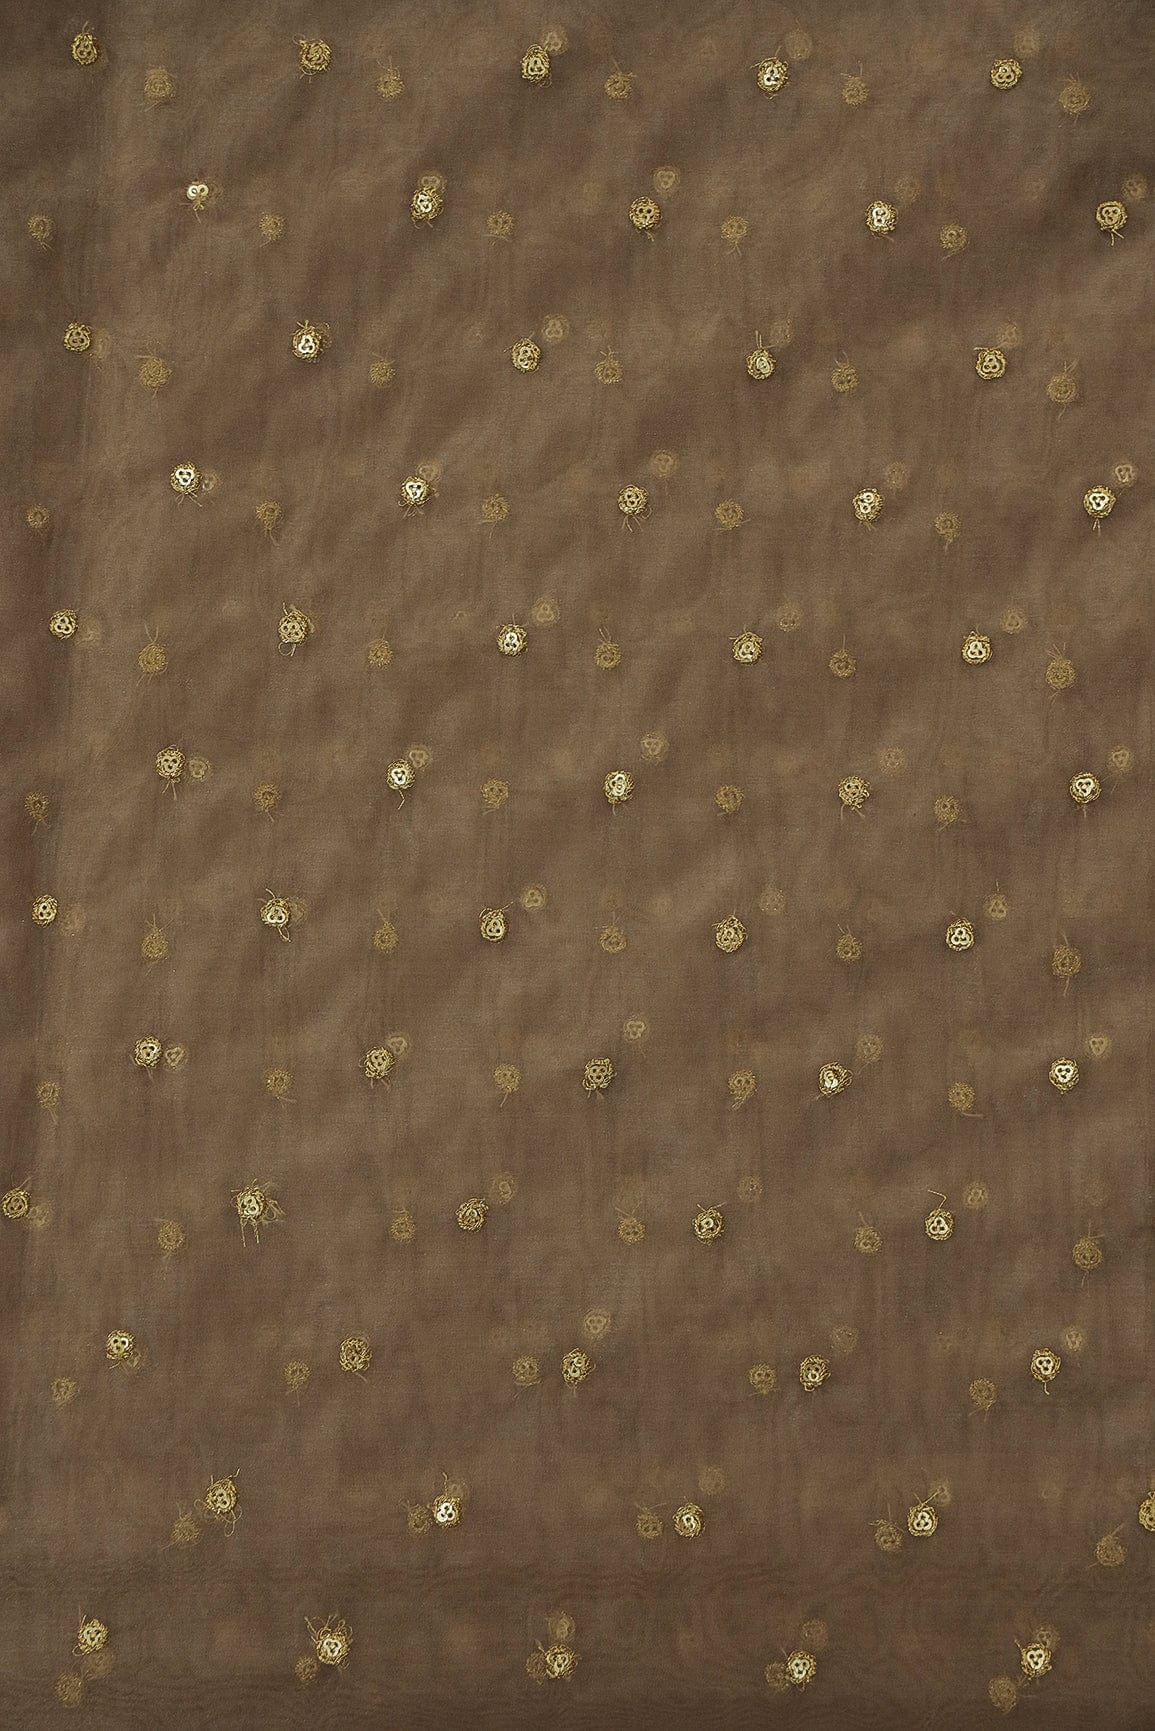 doeraa Embroidery Fabrics Gold Sequins with Gold Thread Motif Embroidery on Brown Organza Fabric